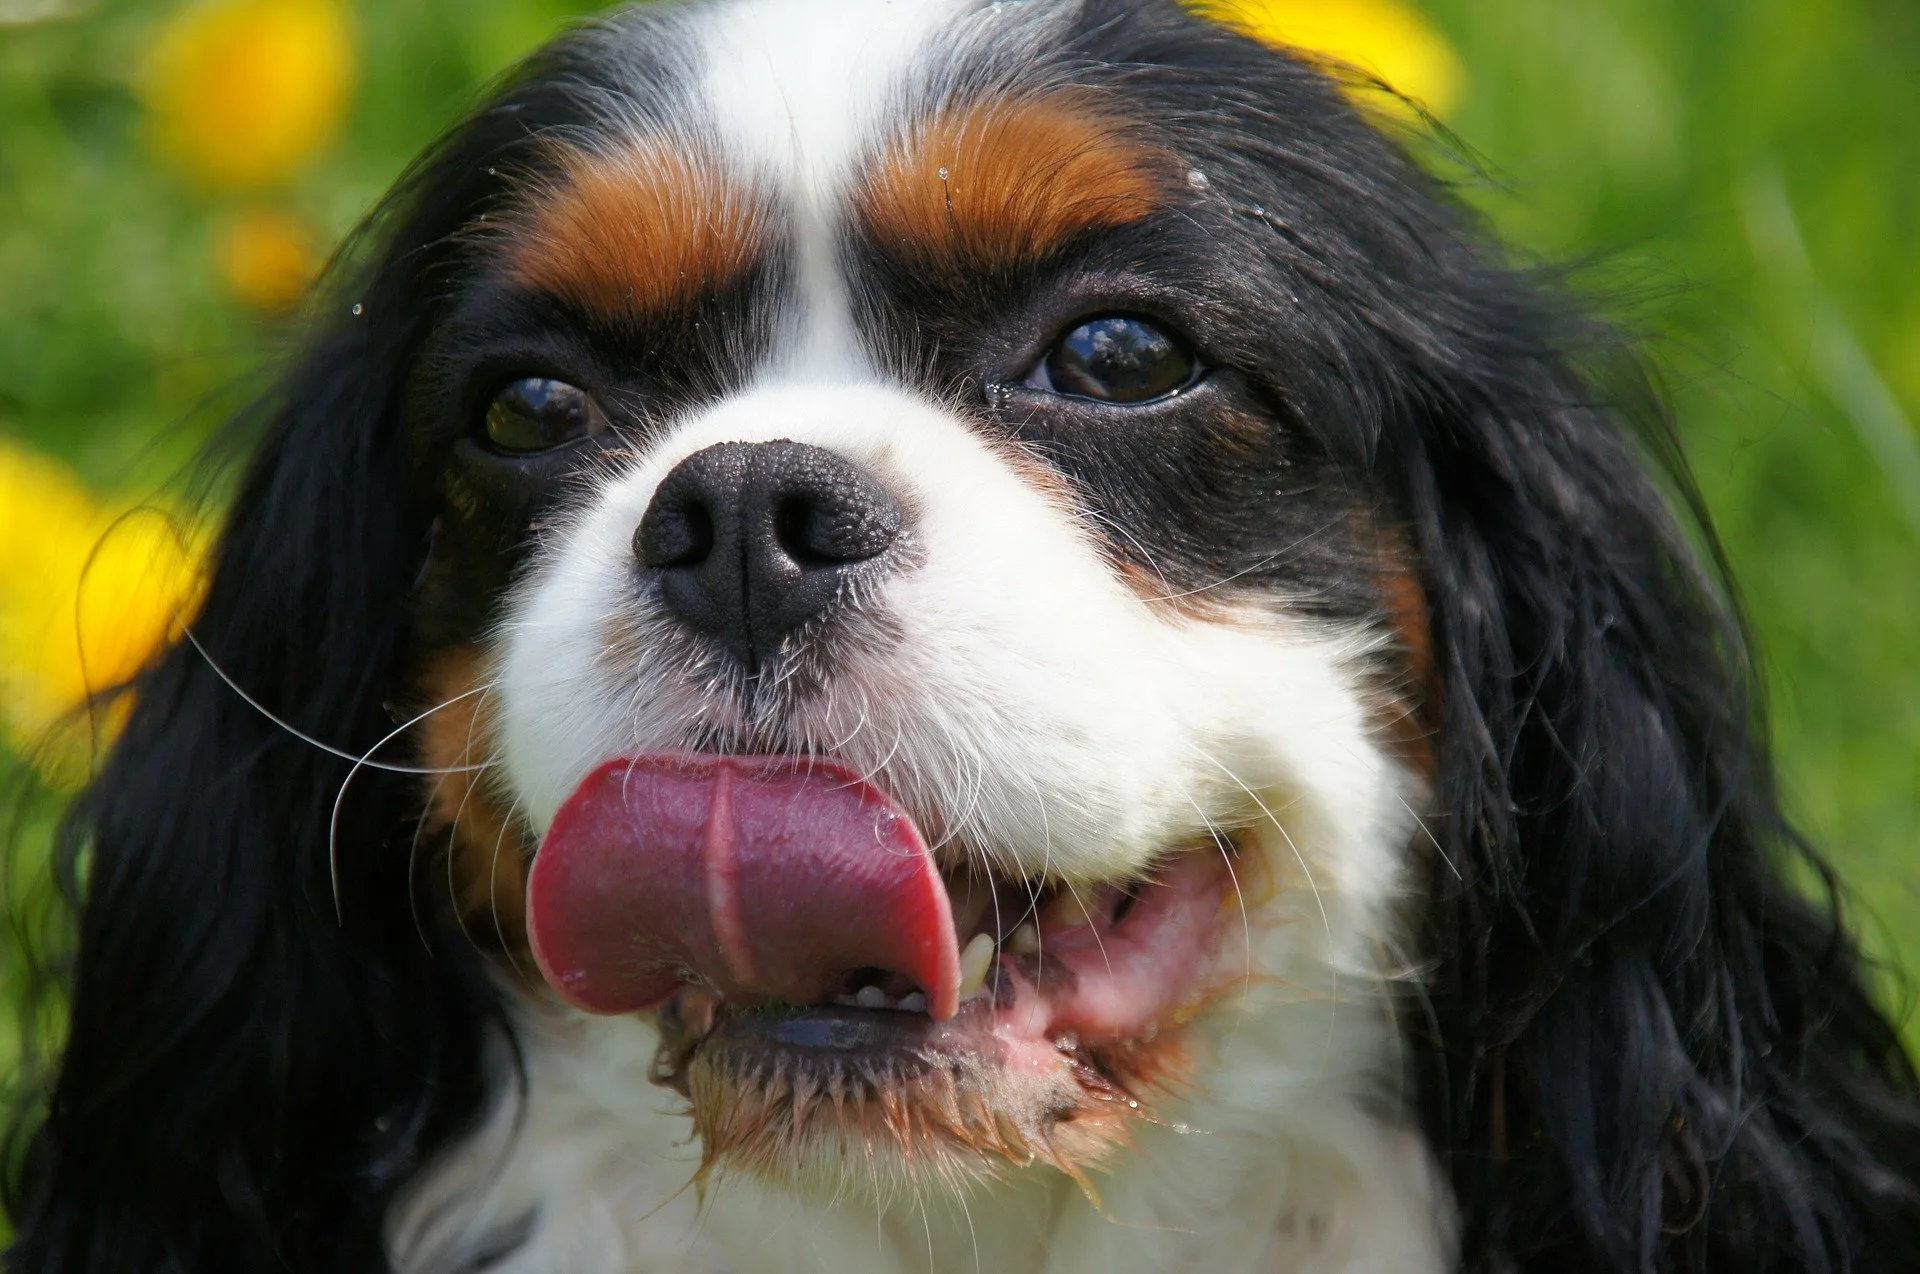 Norway has virtually outlawed the breeding of English bulldogs and Cavalier King Charles spaniels.